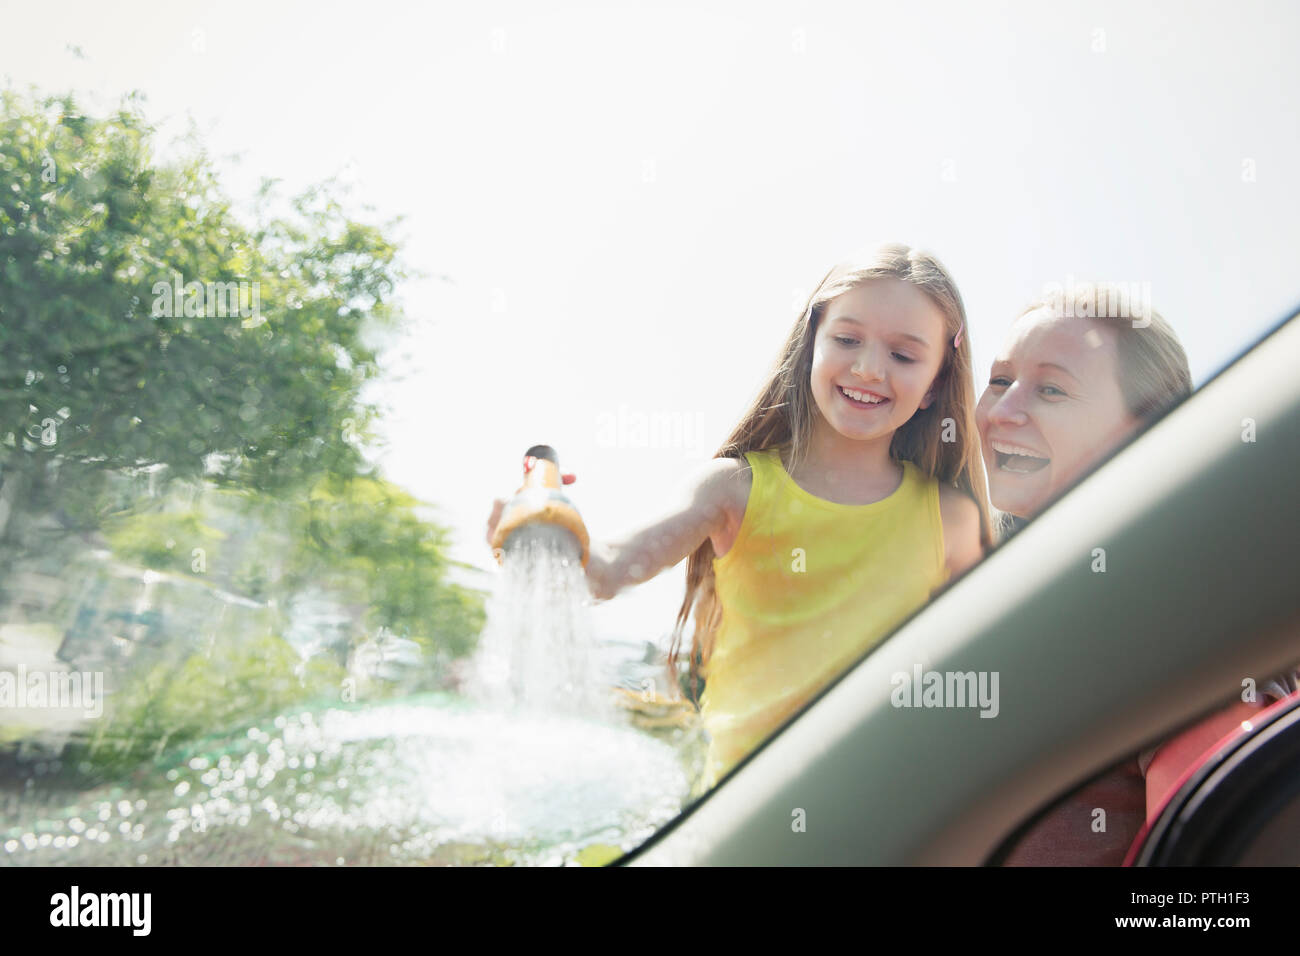 Mother and daughter washing car windshield Stock Photo